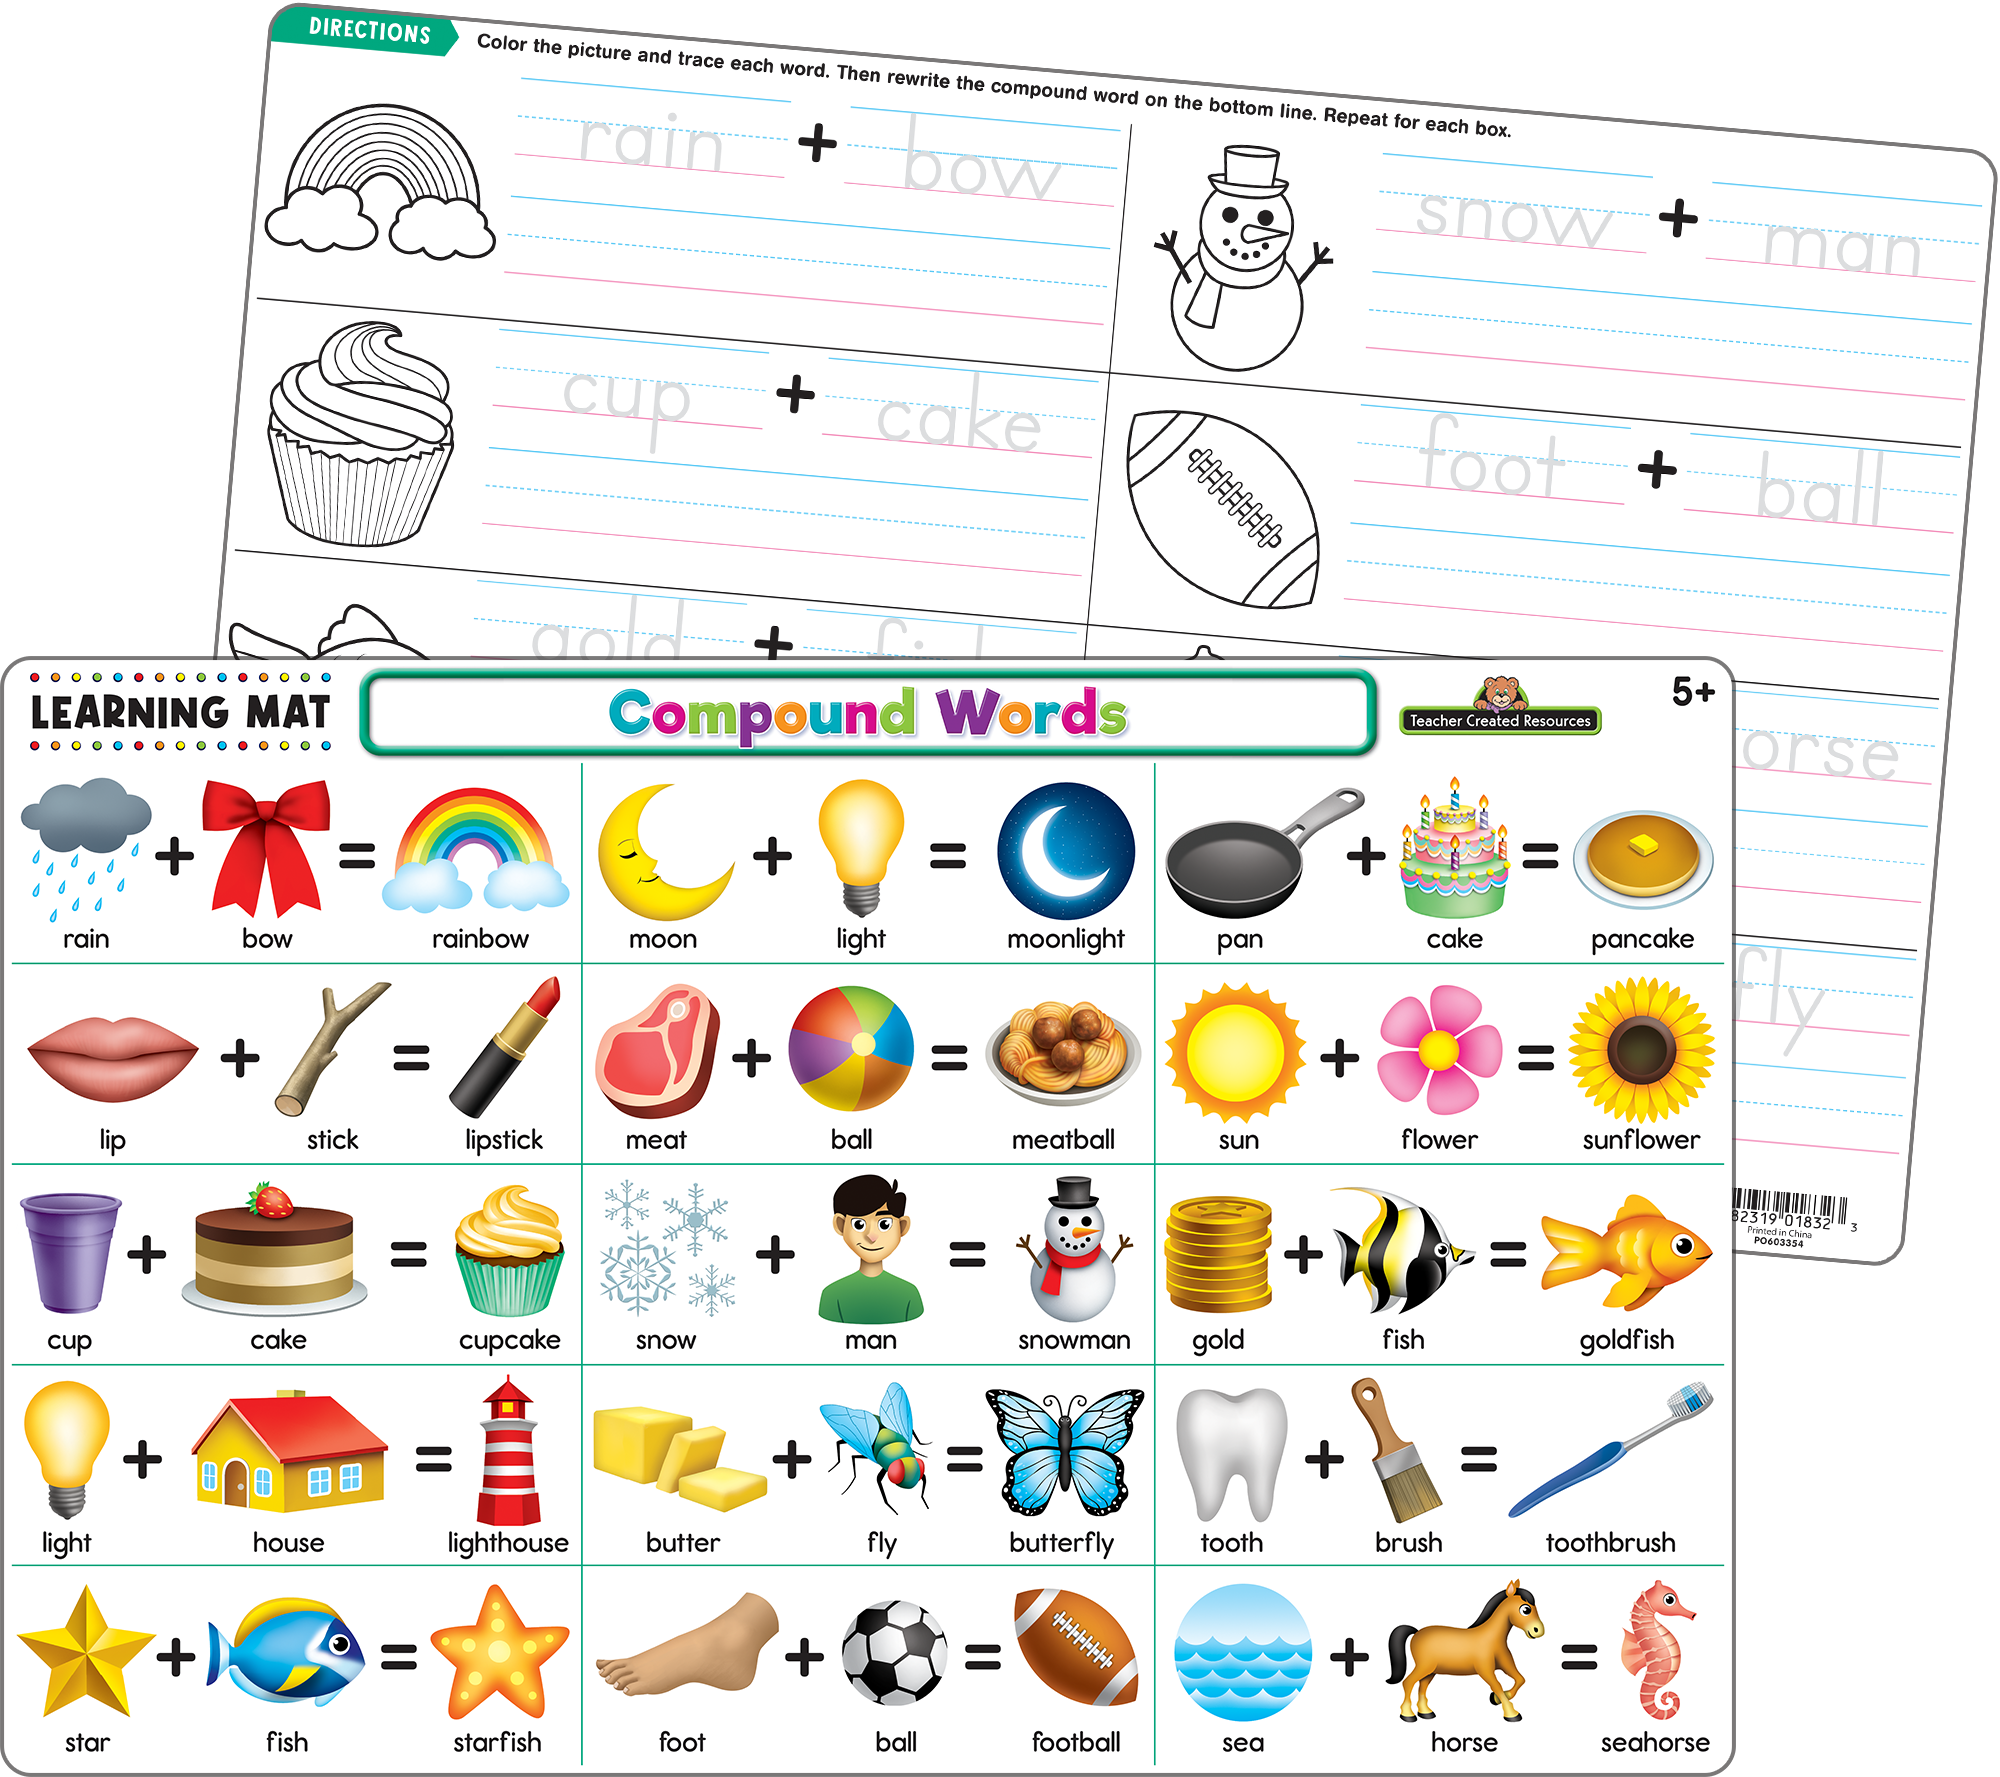 Compound Words Learning Mat